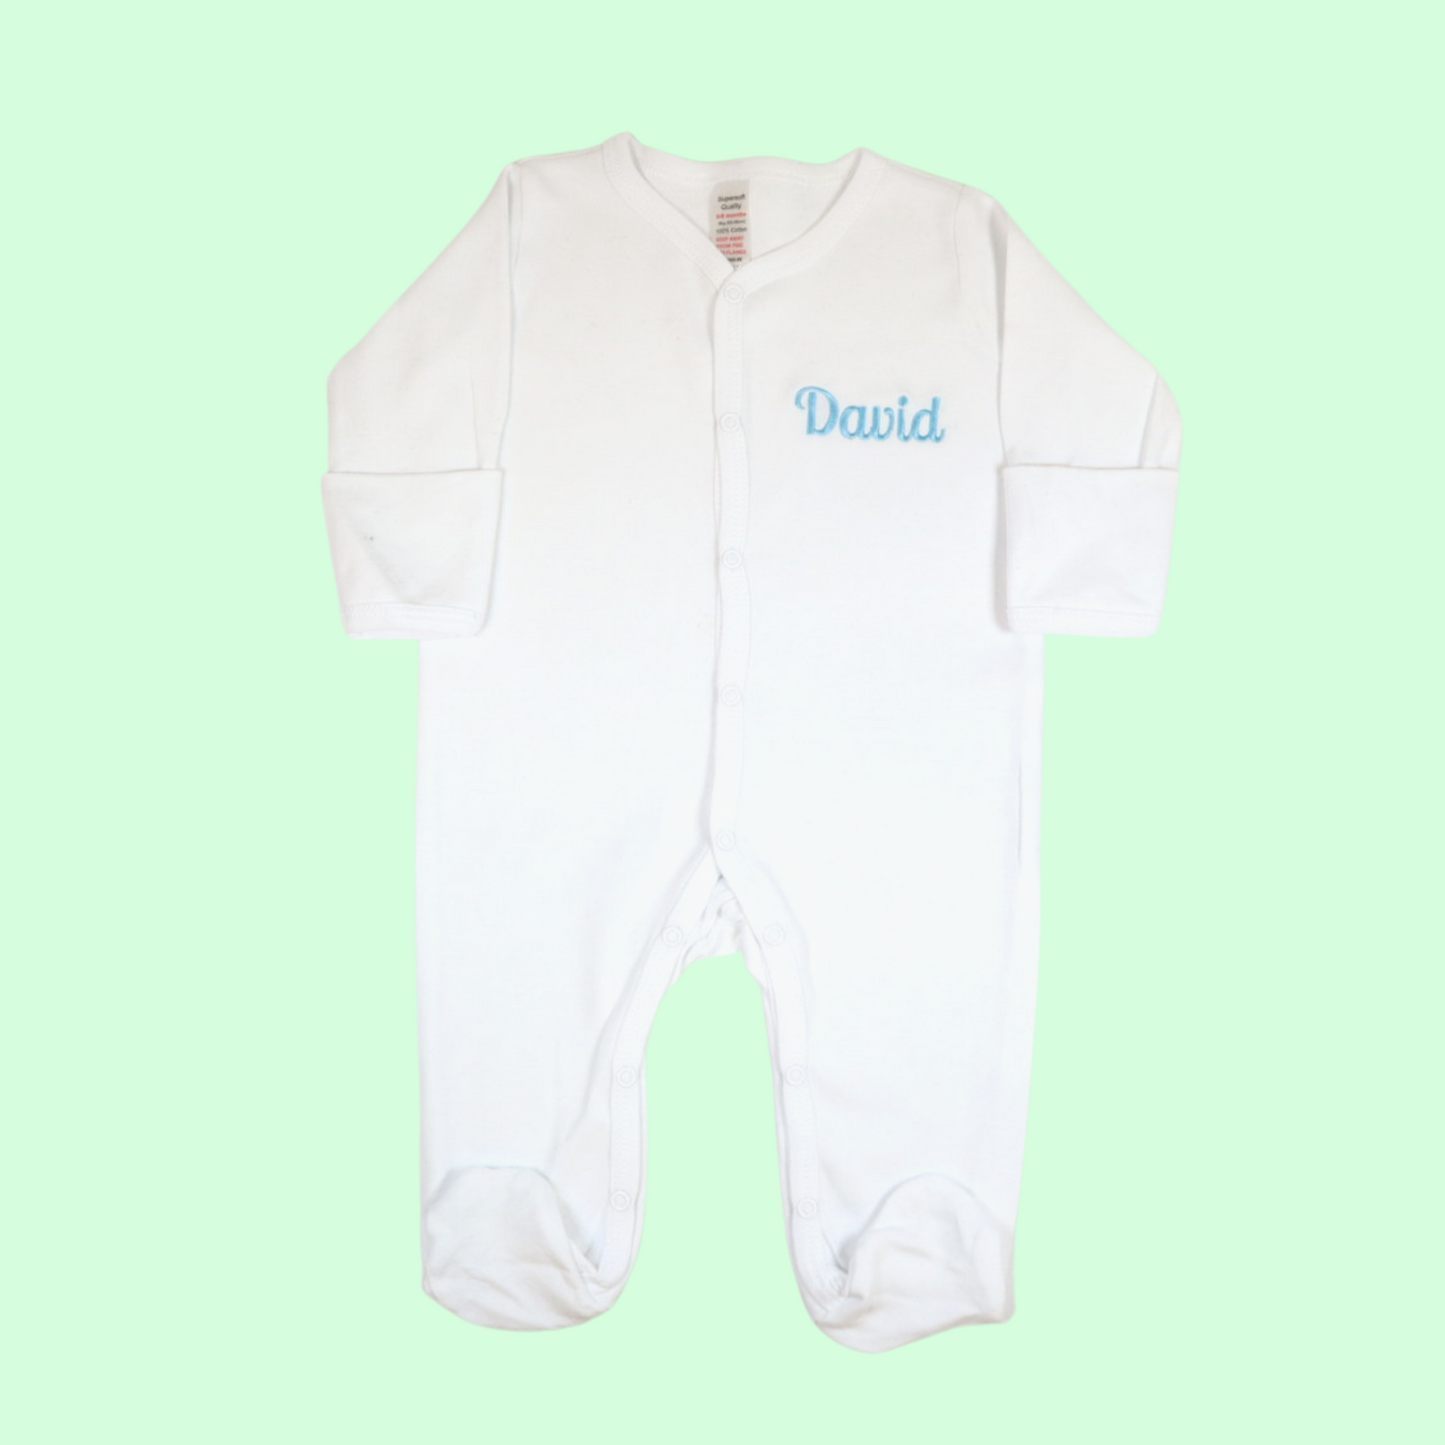 Personalised White Baby suit/grow